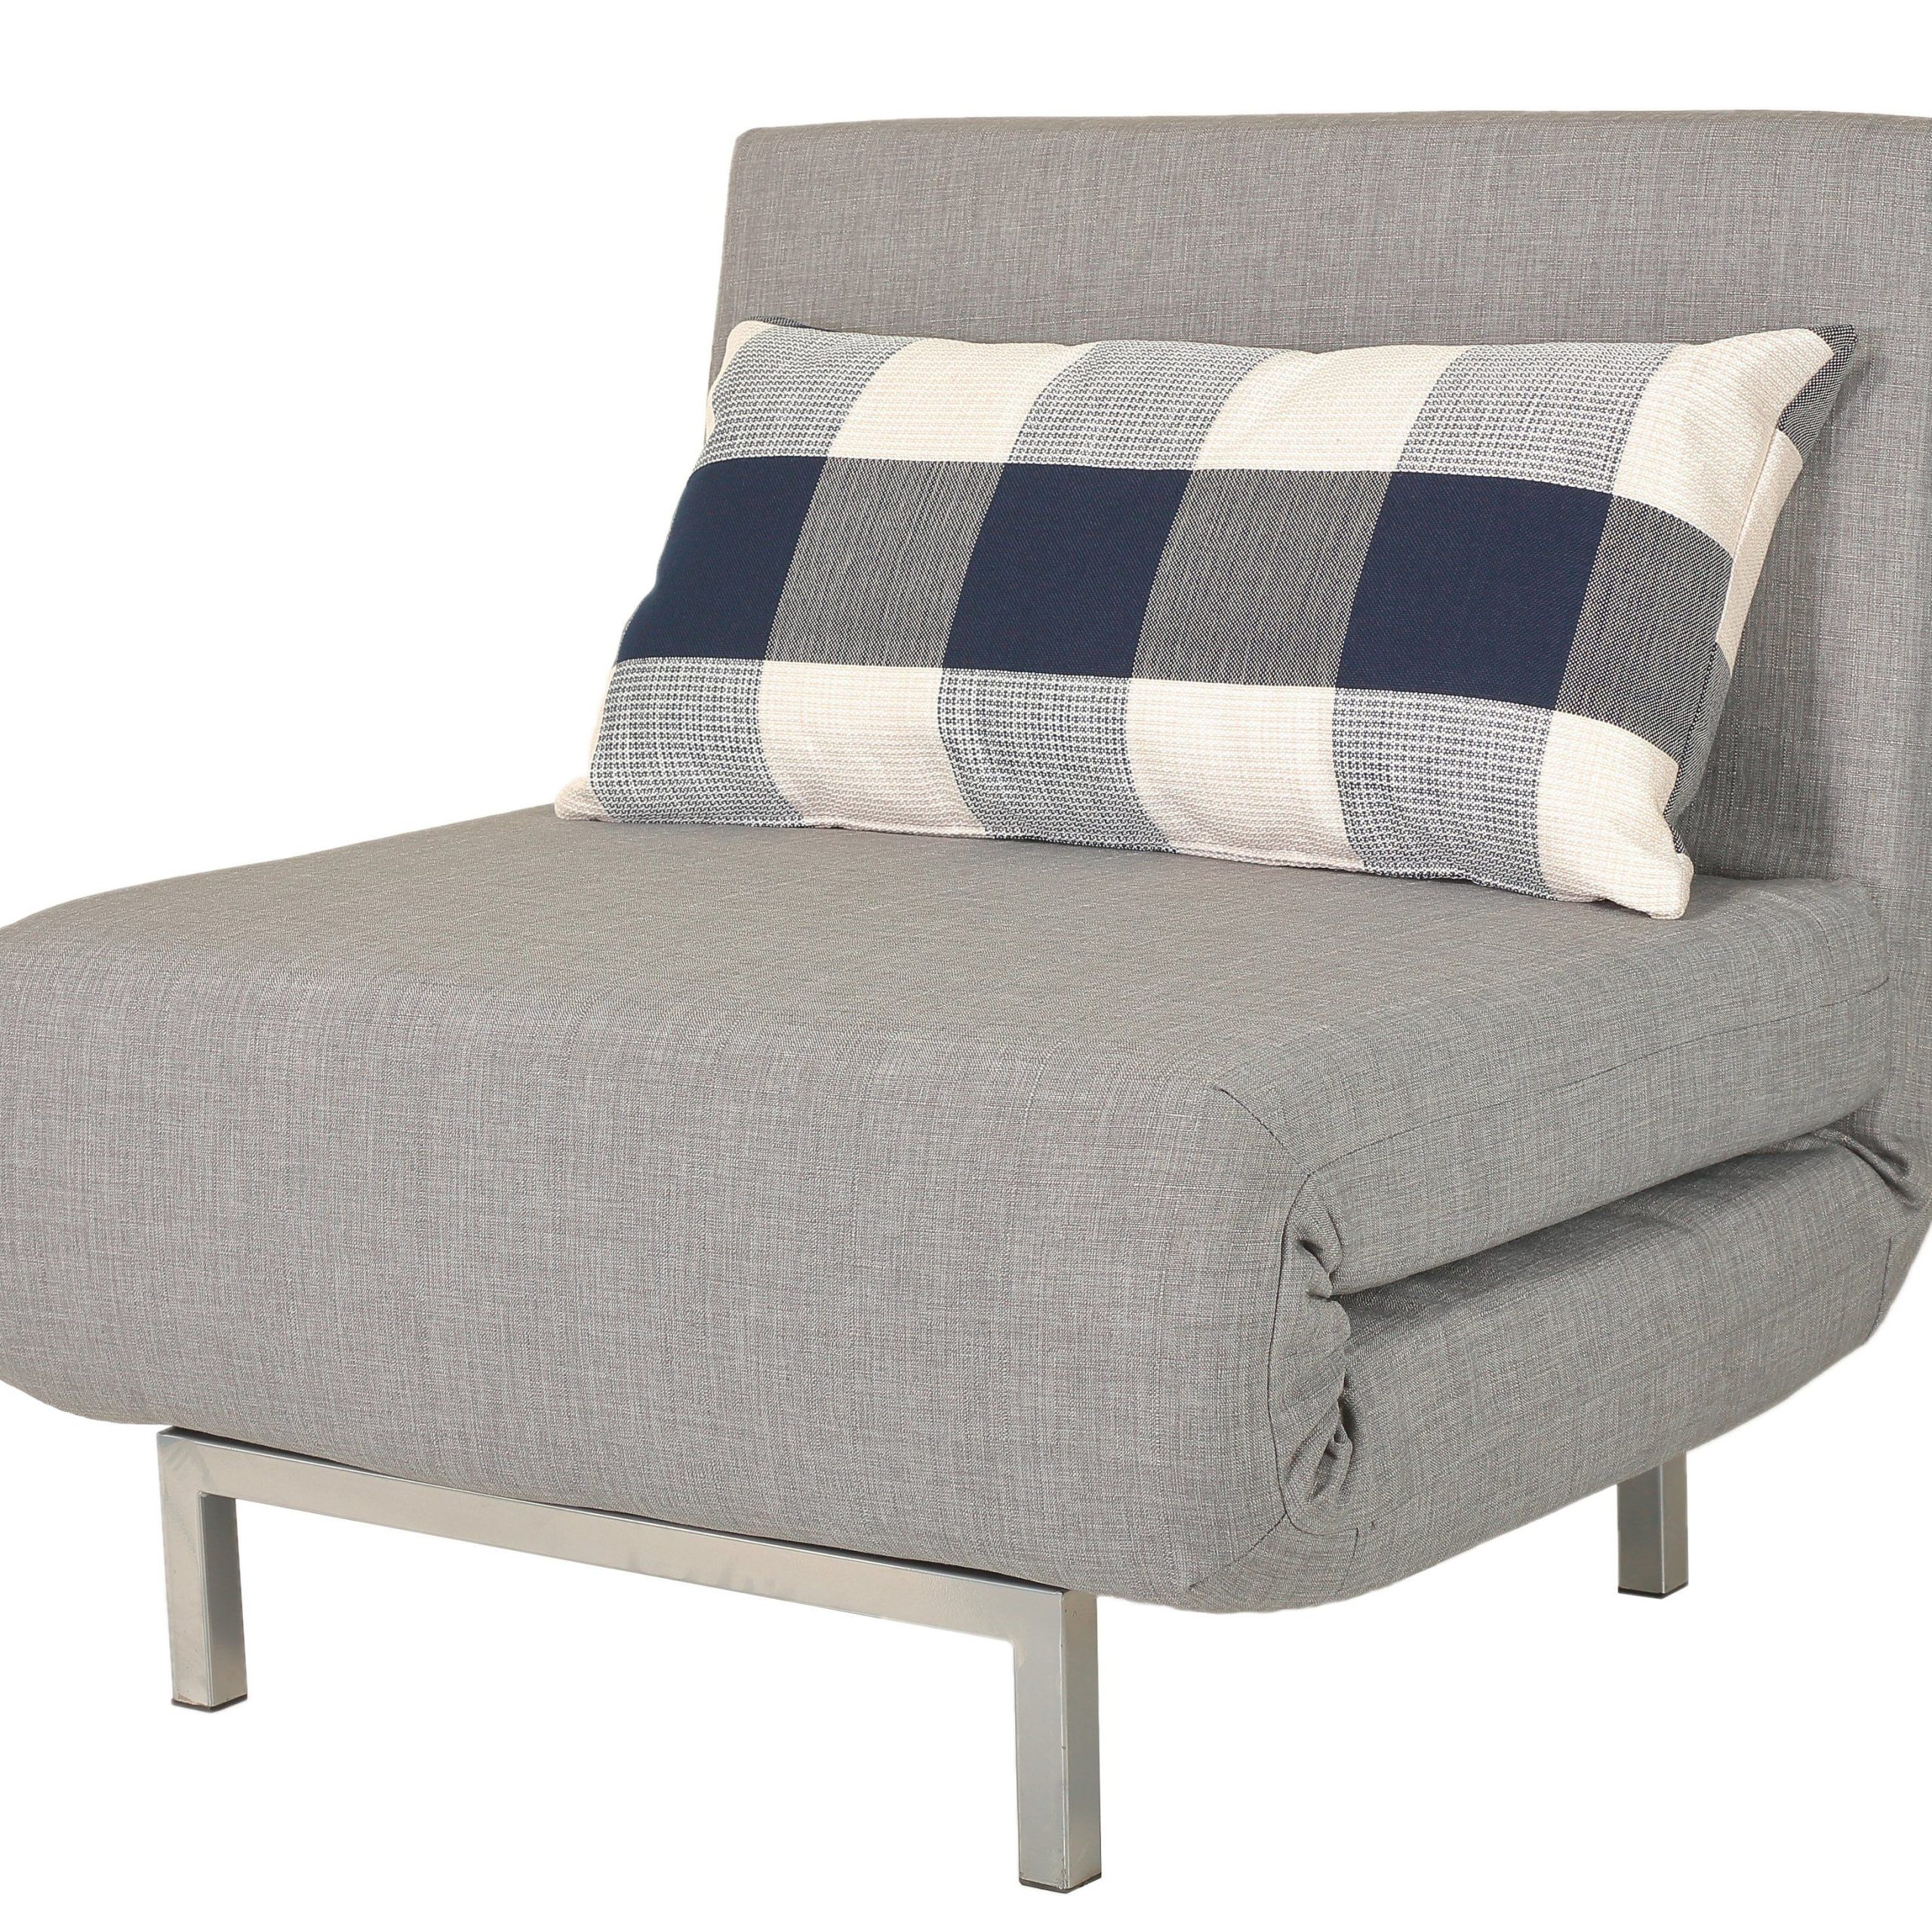 Cortesi Home Savion Grey Convertible Accent Chair Bed Living Room In Convertible Light Gray Chair Beds (View 11 of 20)